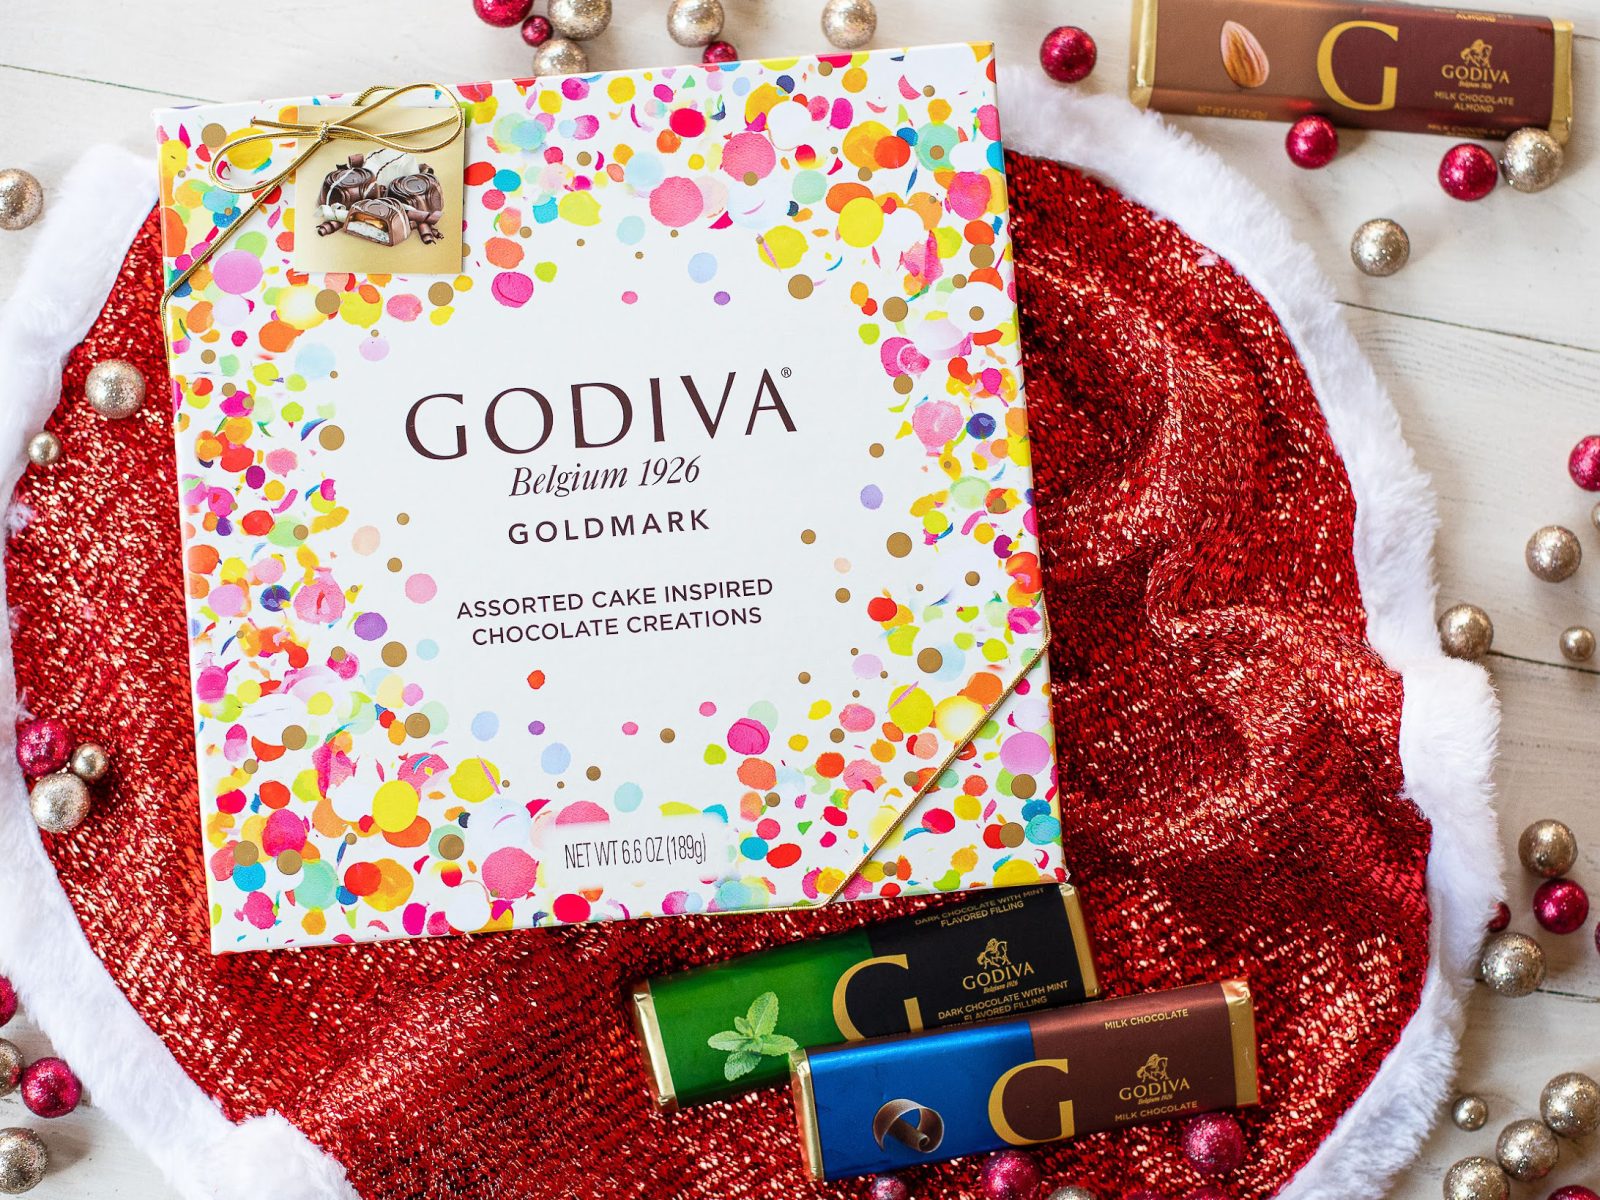 Enter For A Chance To Win Gift Cards or FREE GODIVA® In The GODIVA Wonder-Full Giveaway